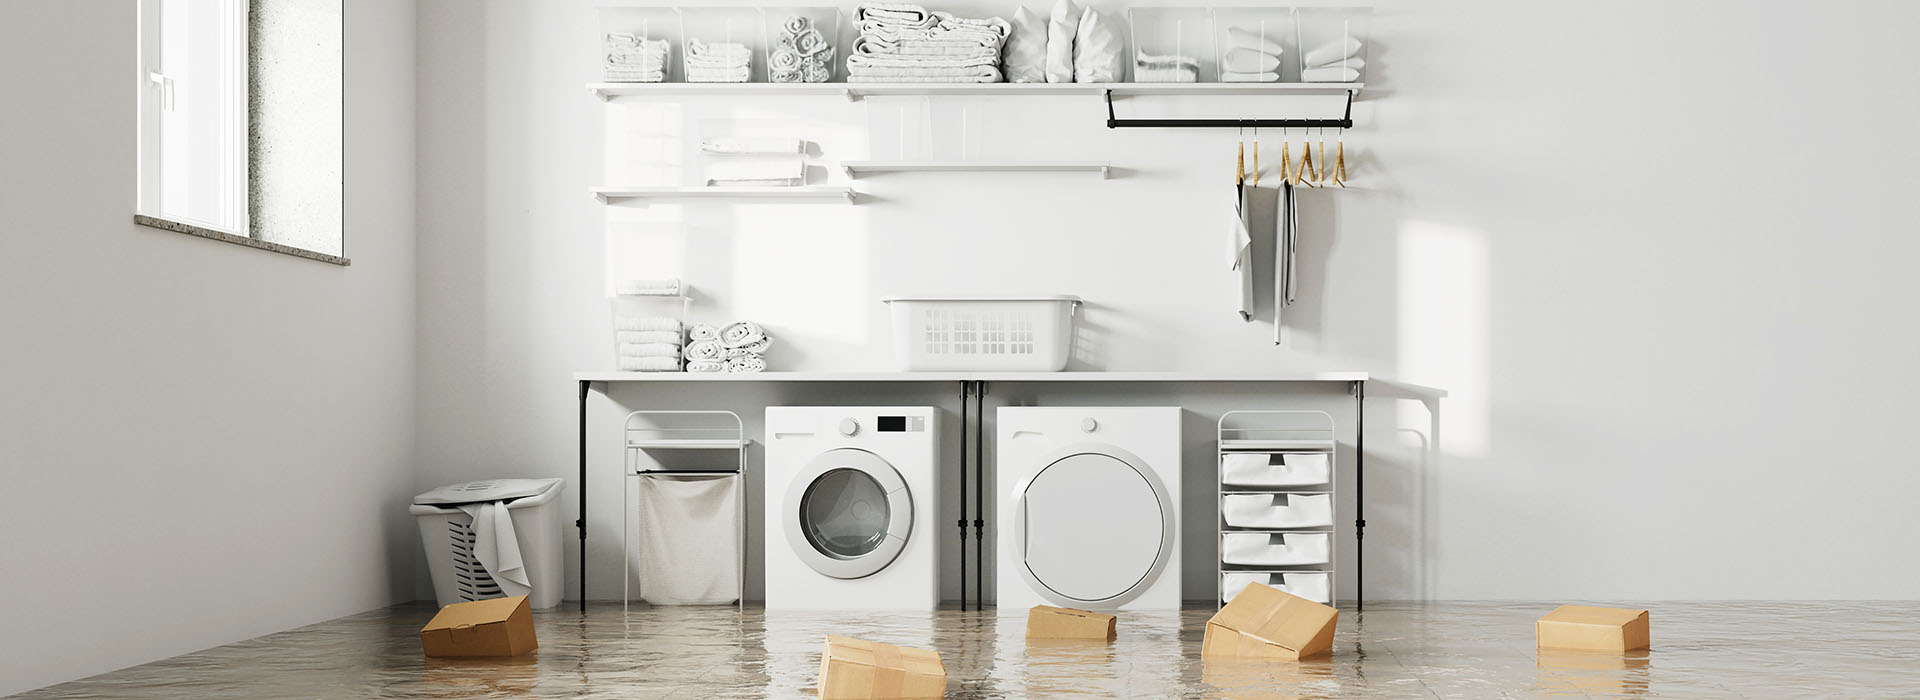 All-white flooded basement laundry room with boxes floating around washer and dryer